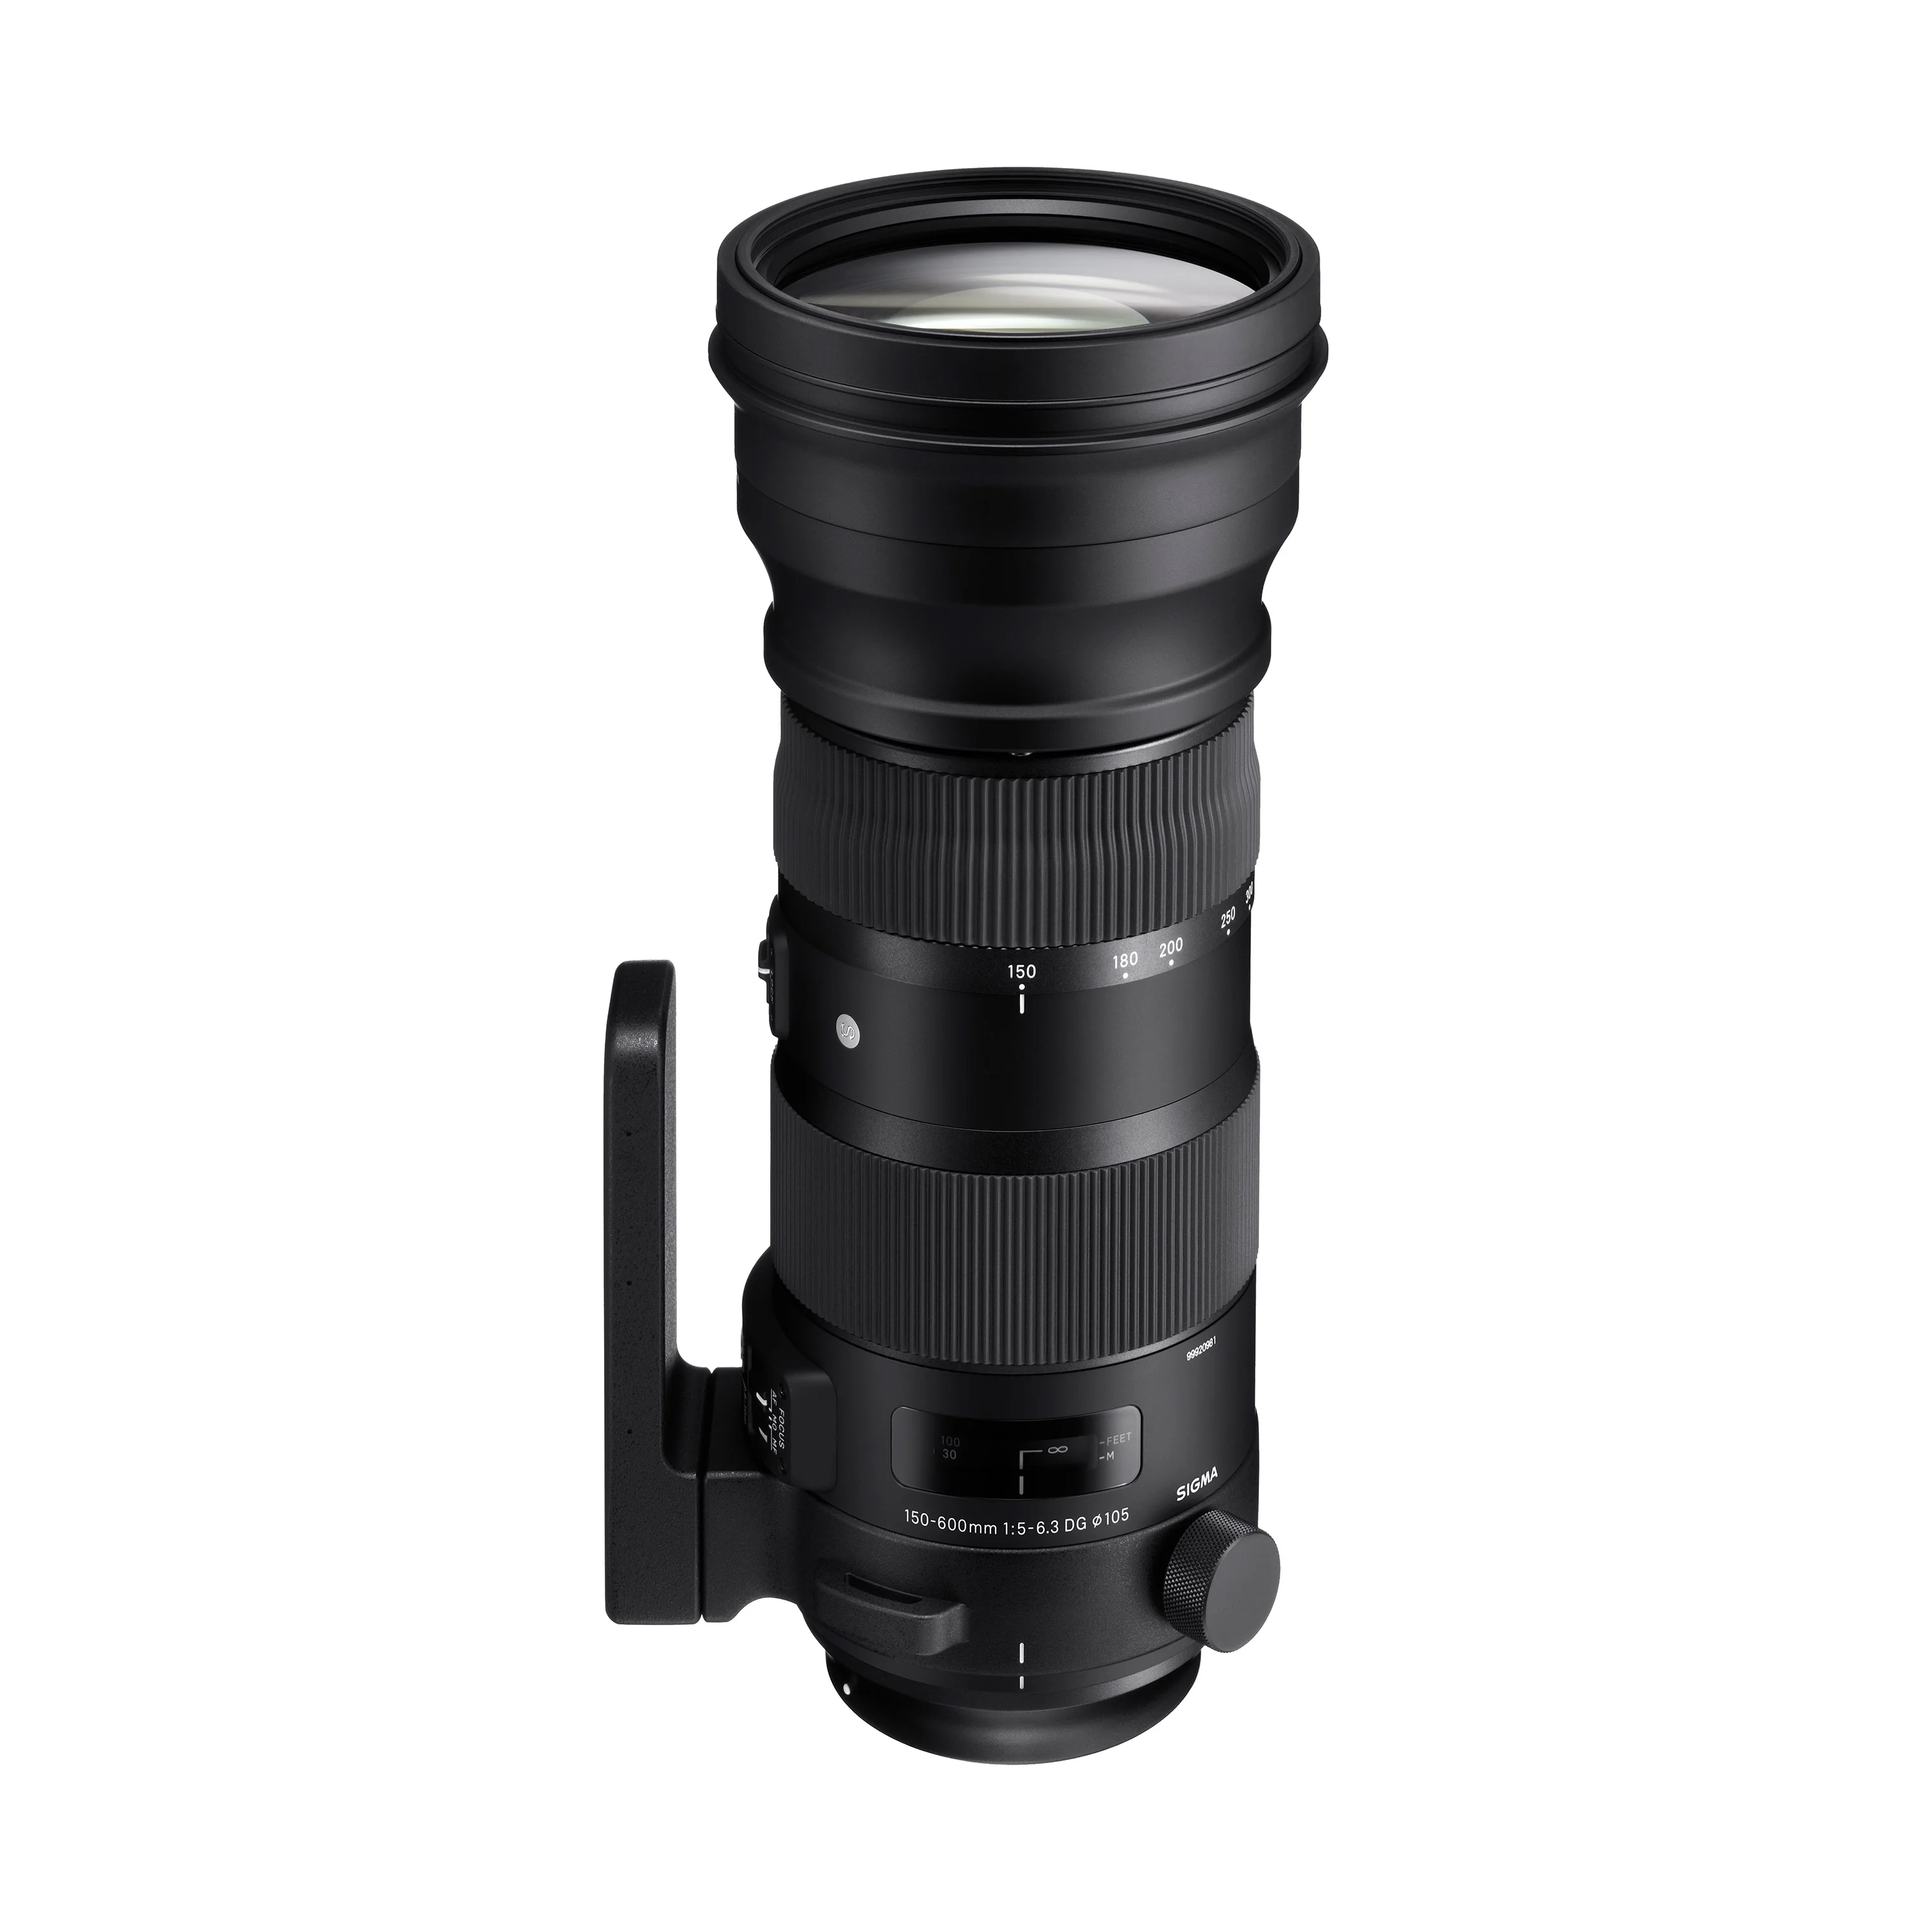 150-600mm F/5-6.3 DG OS HSM|S CANON